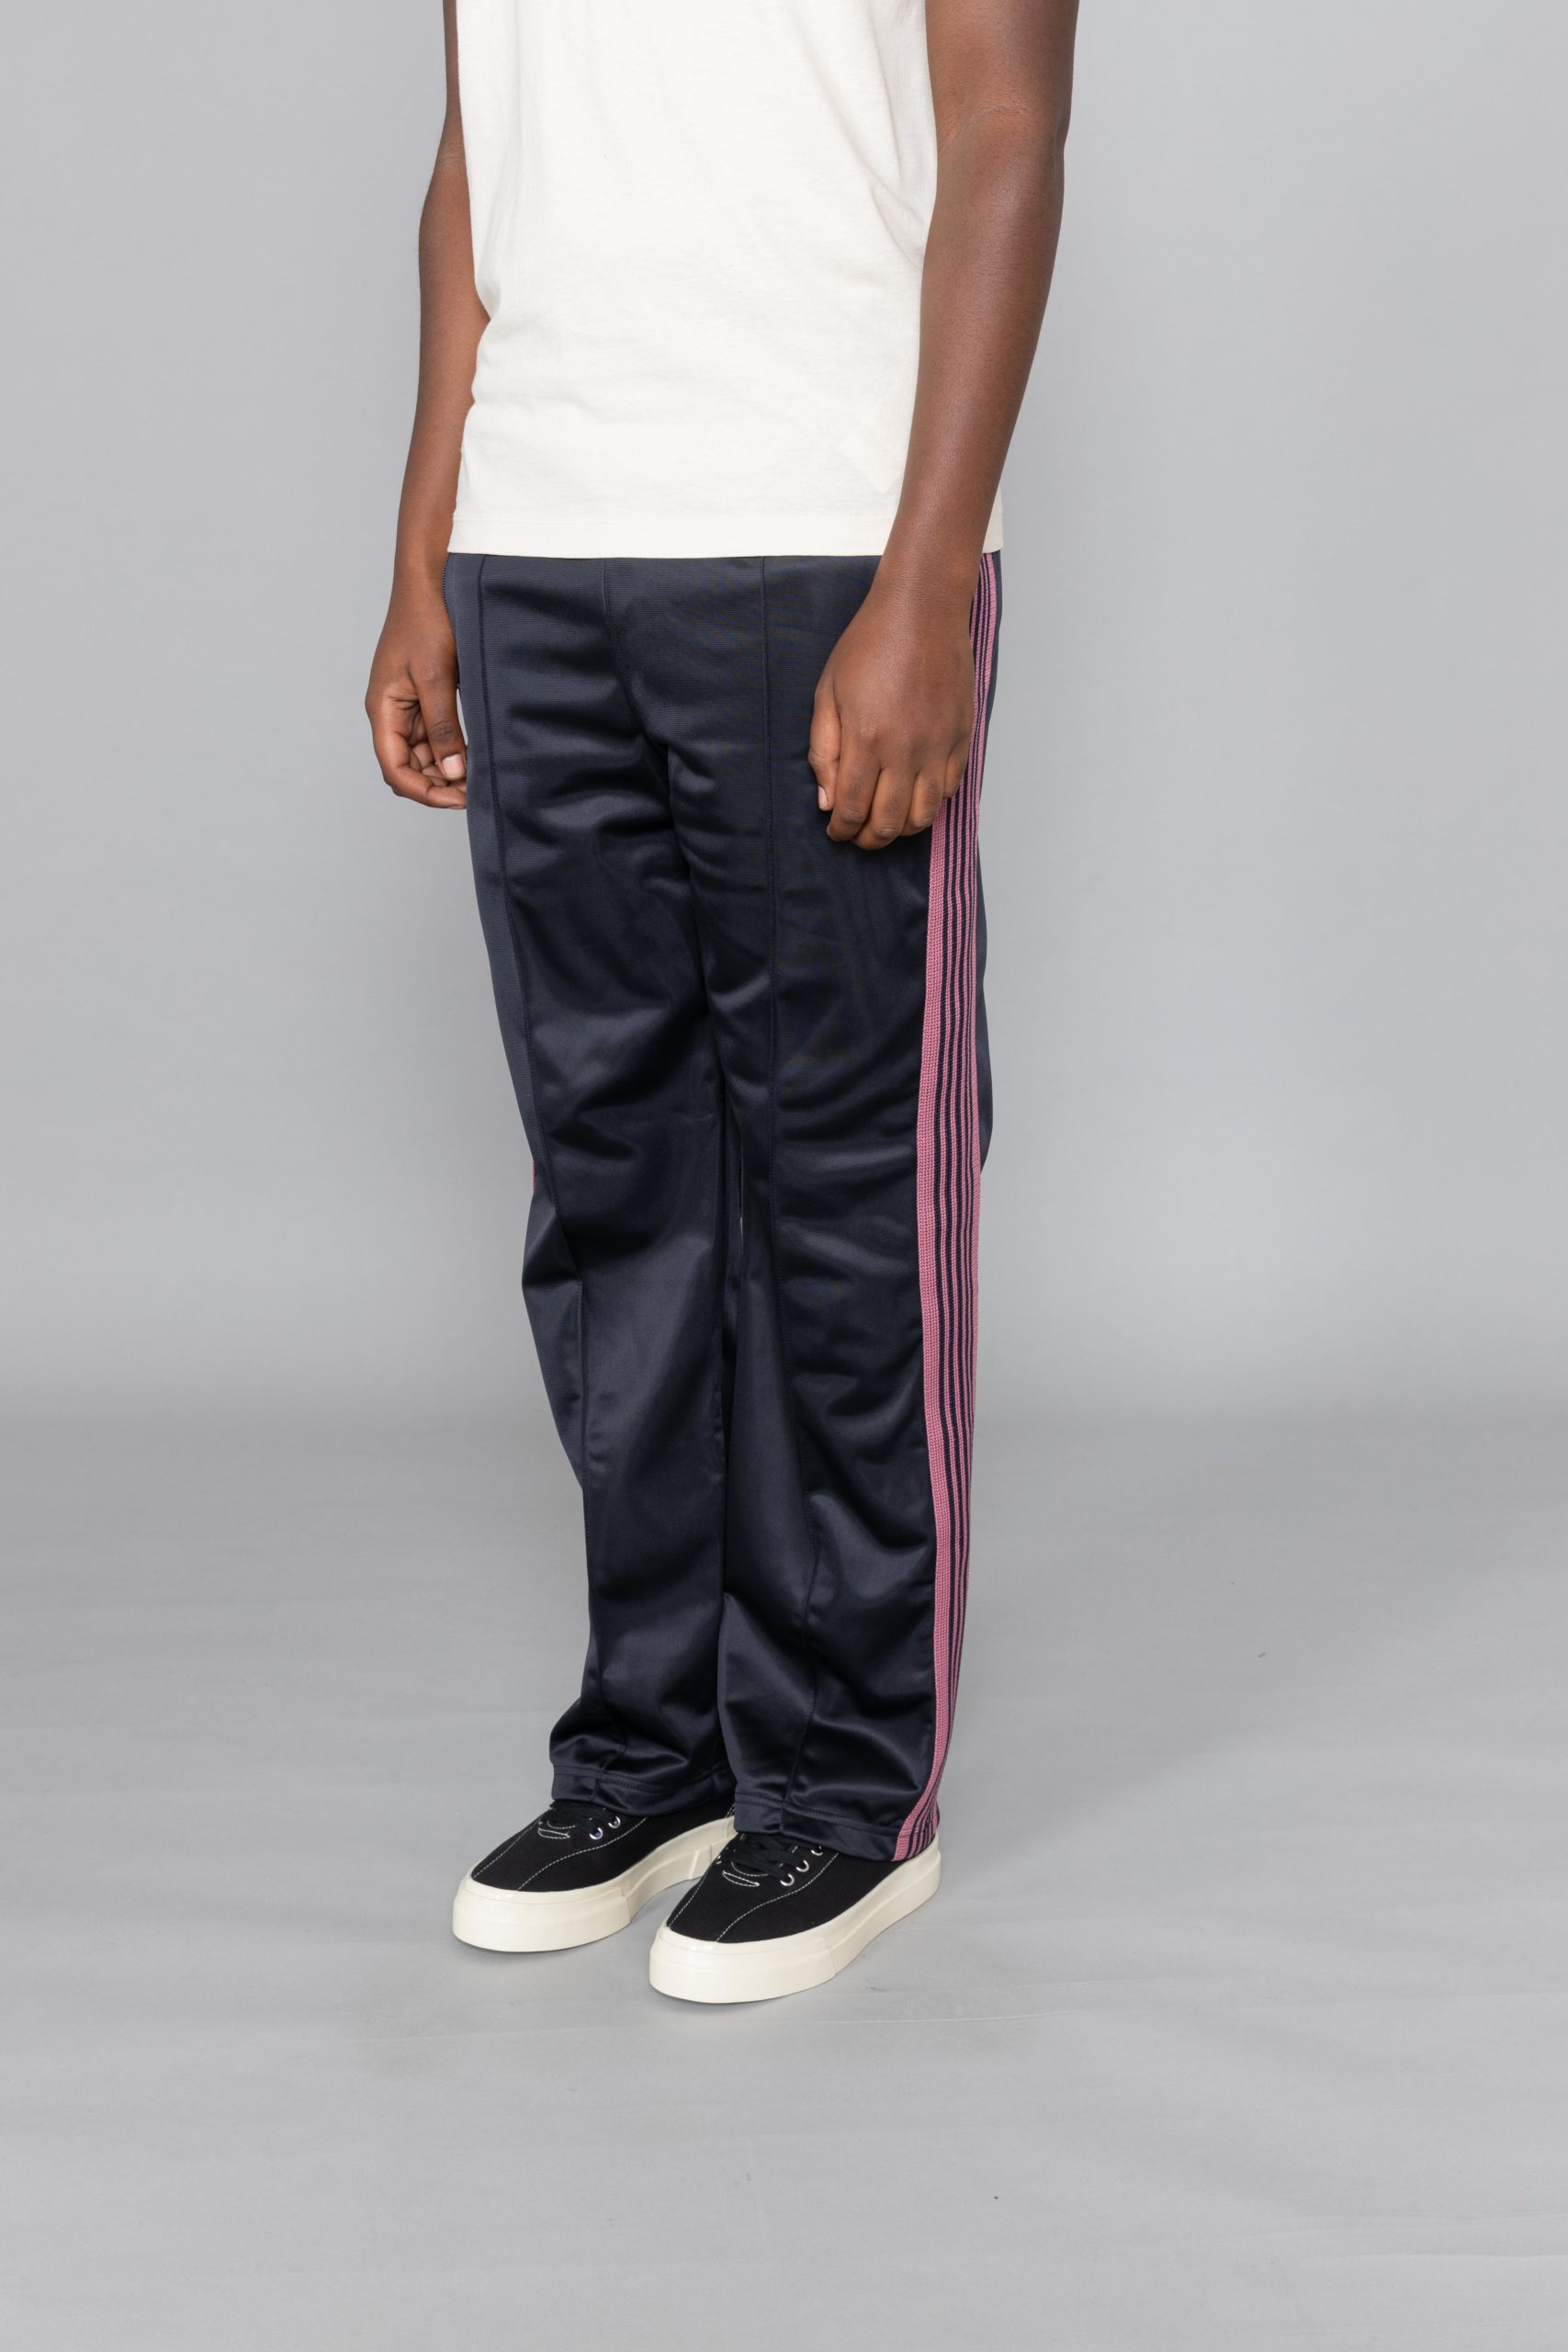 needles H.D. TRACK PANT - POLY SMOOTH - www.glycoala.com